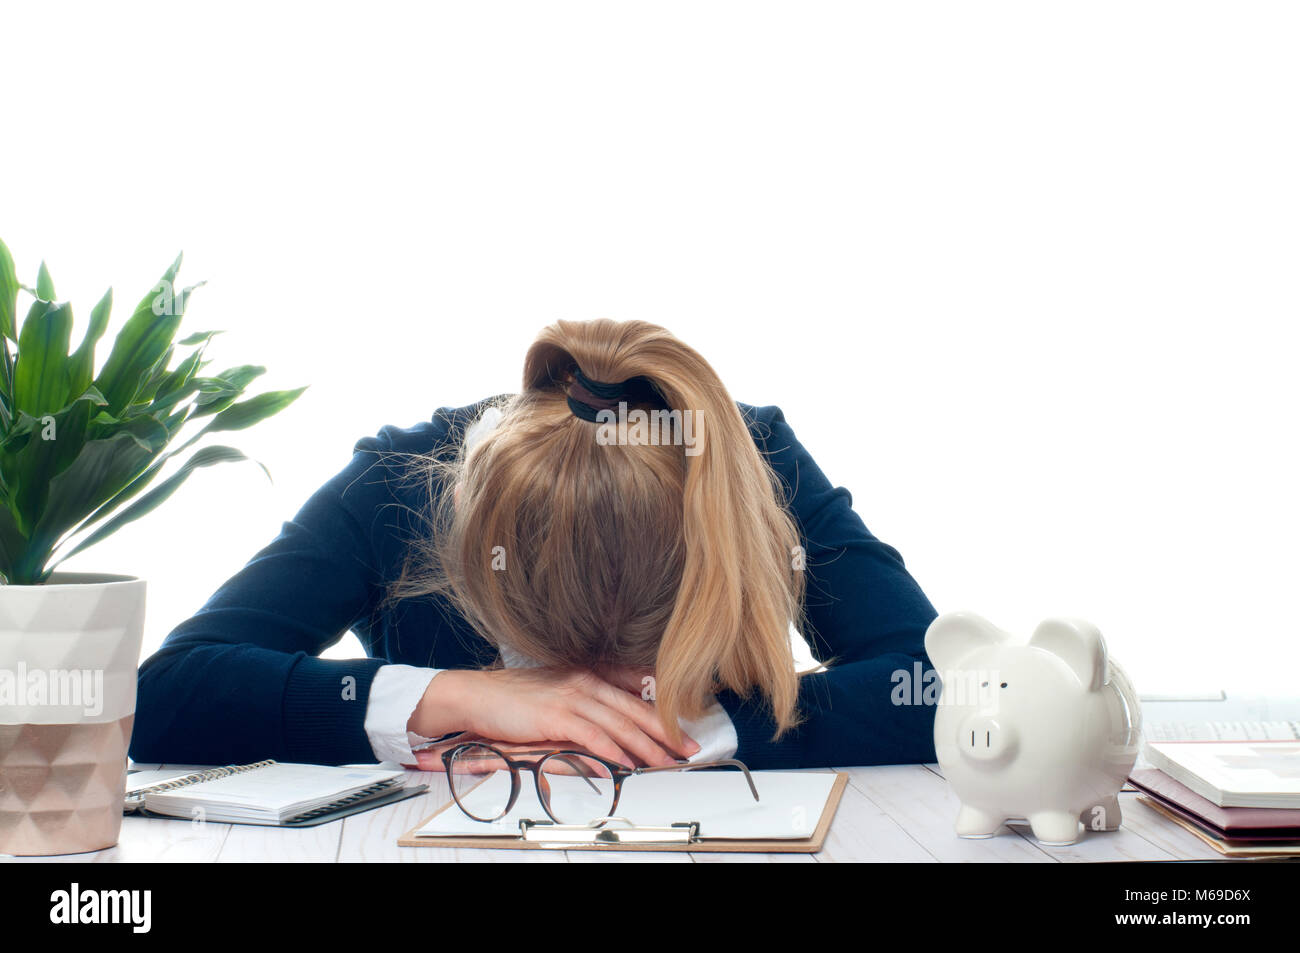 Overworked And Tired Young Woman Sleeping On Desk At Office Too